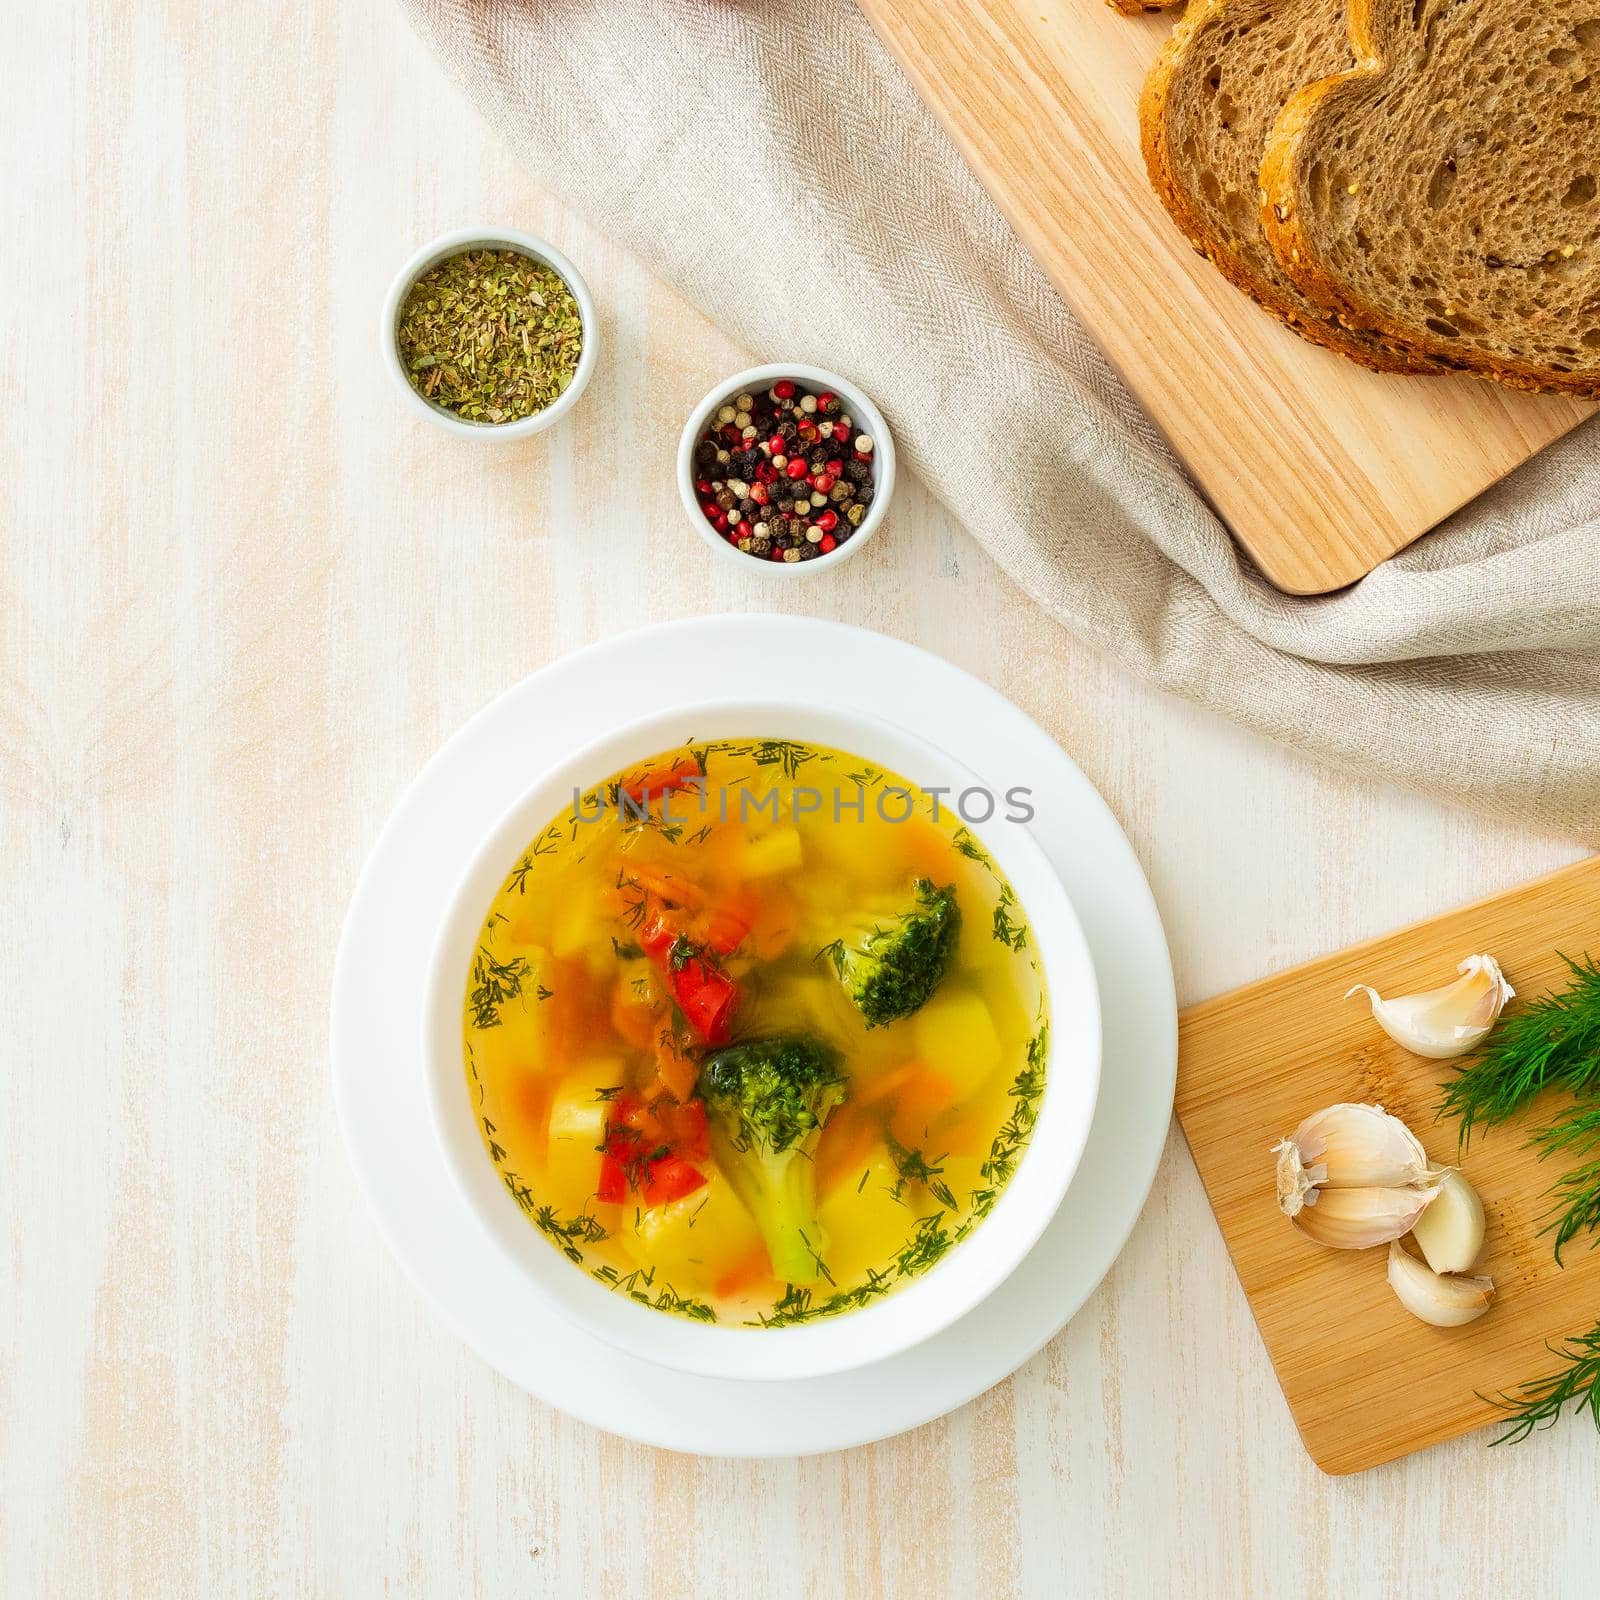 Healthy bright spring vegetable dietary vegetarian soup by NataBene